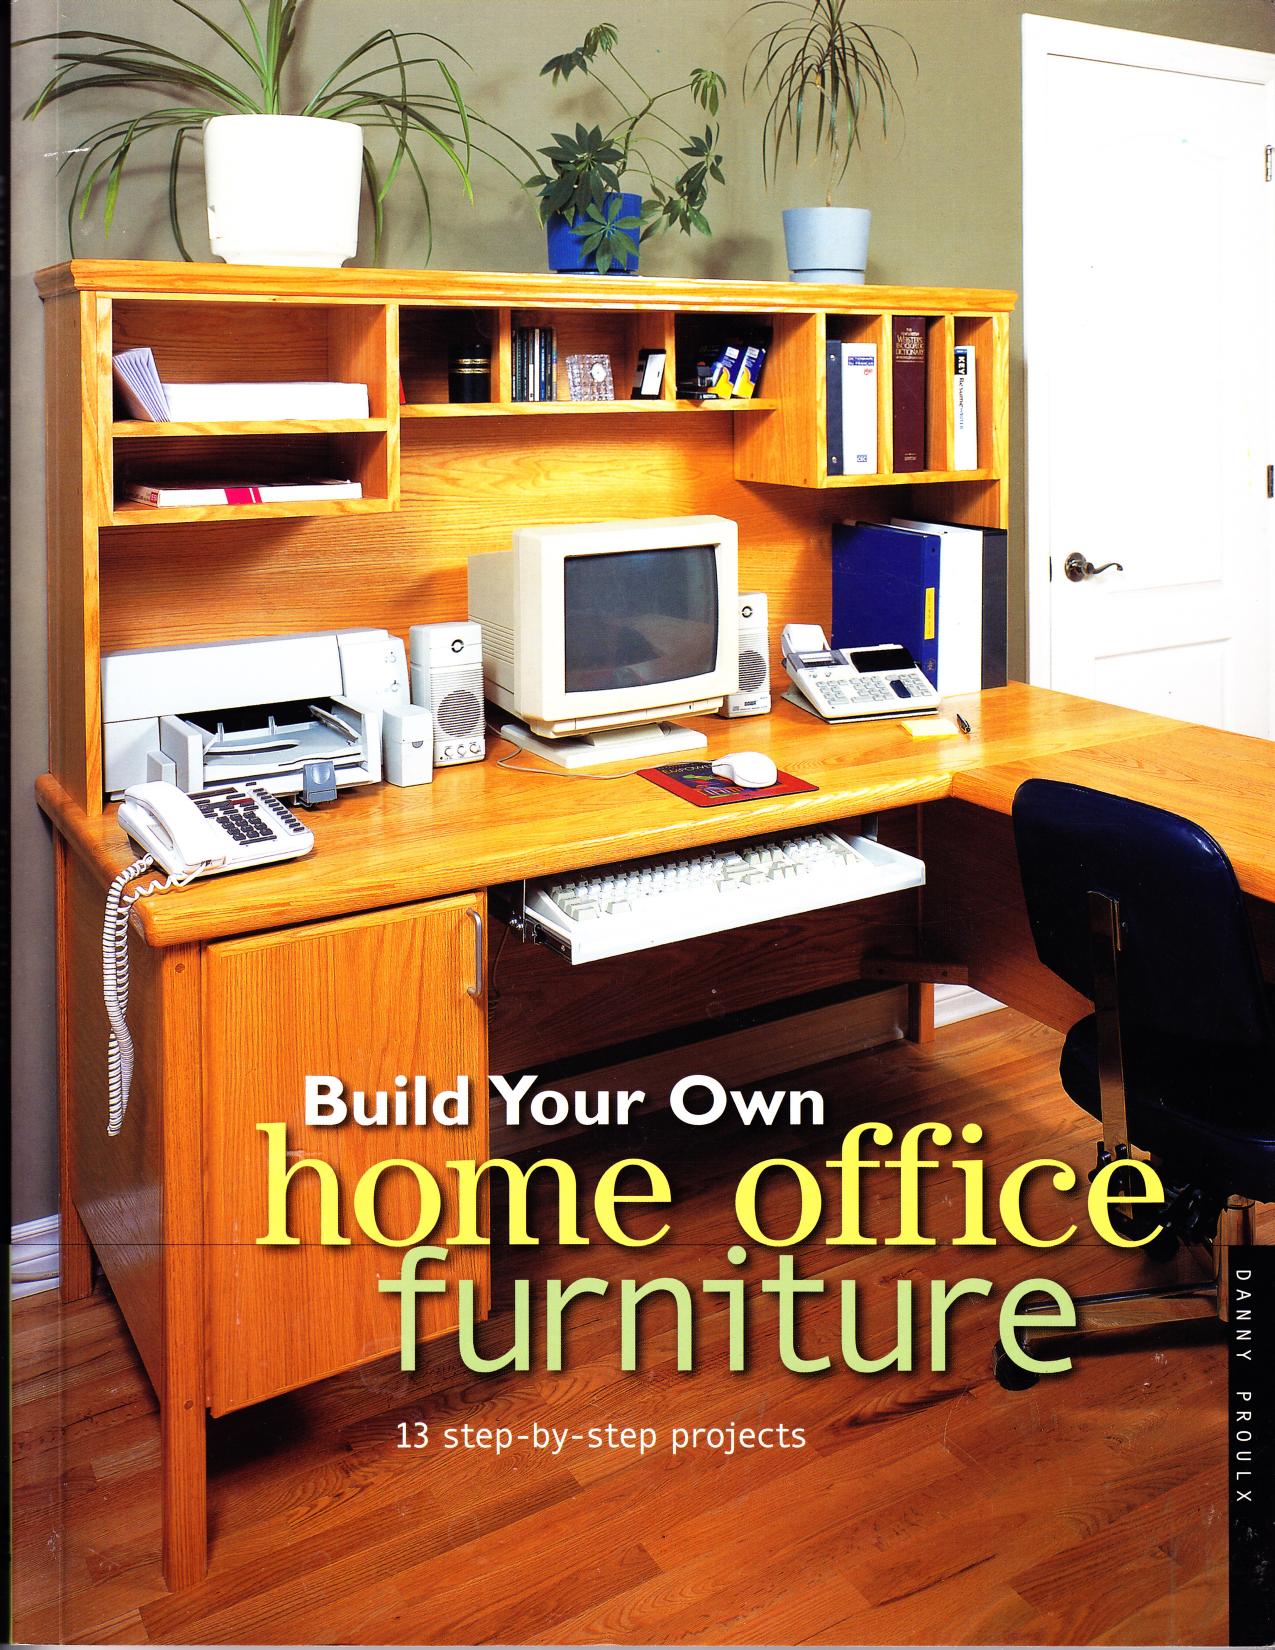 Build Your Own Home Office Furniture by Danny Proulx